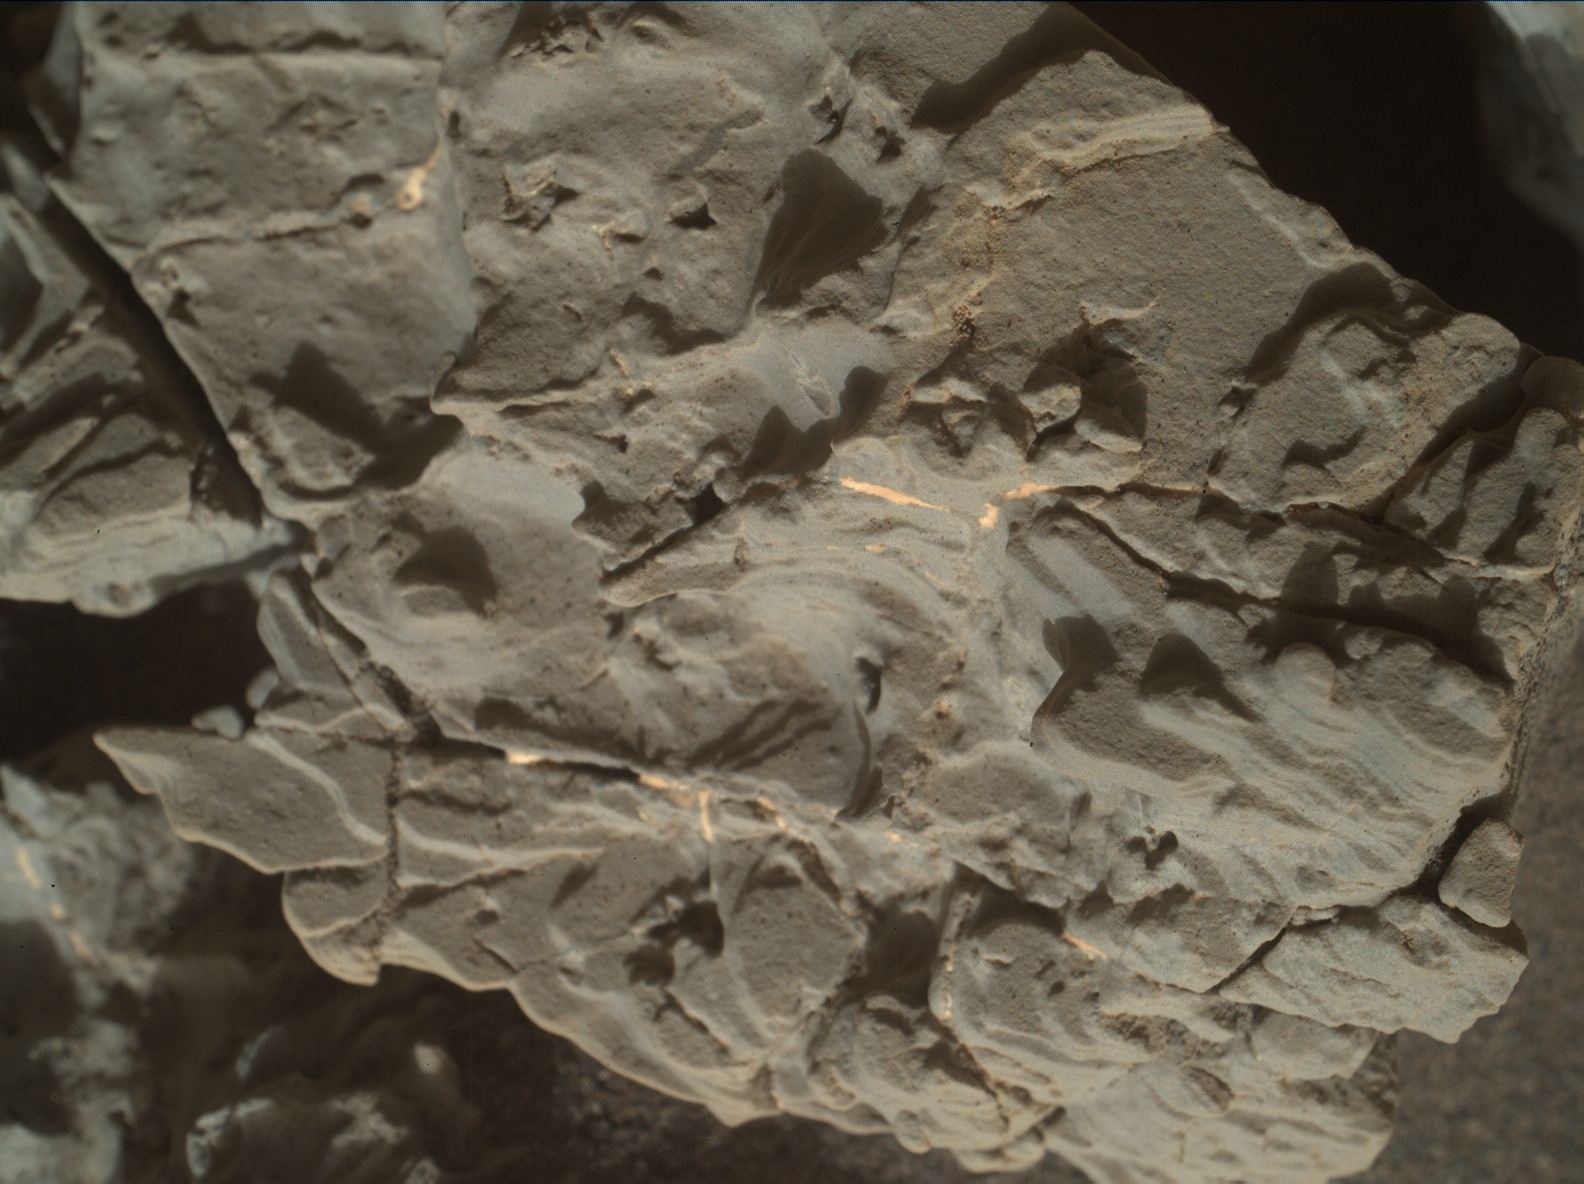 Nasa's Mars rover Curiosity acquired this image using its Mars Hand Lens Imager (MAHLI) on Sol 1935